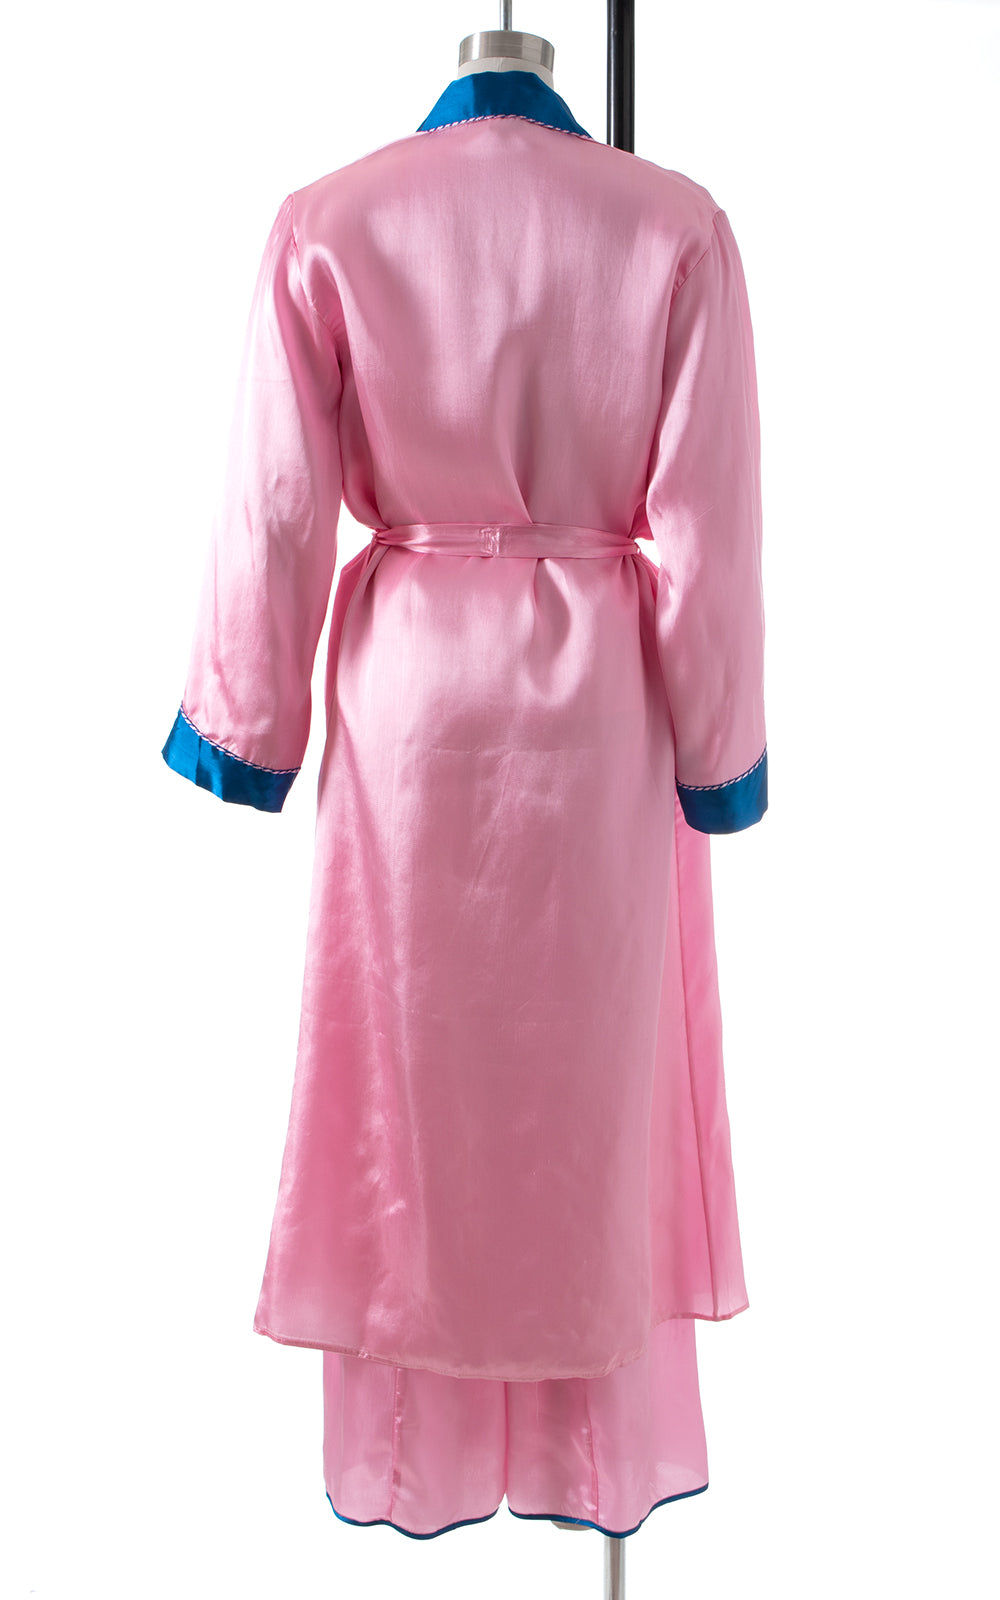 1960s Asian Dragon Embroidered Pink Satin Pajama, Robe & Slippers Set